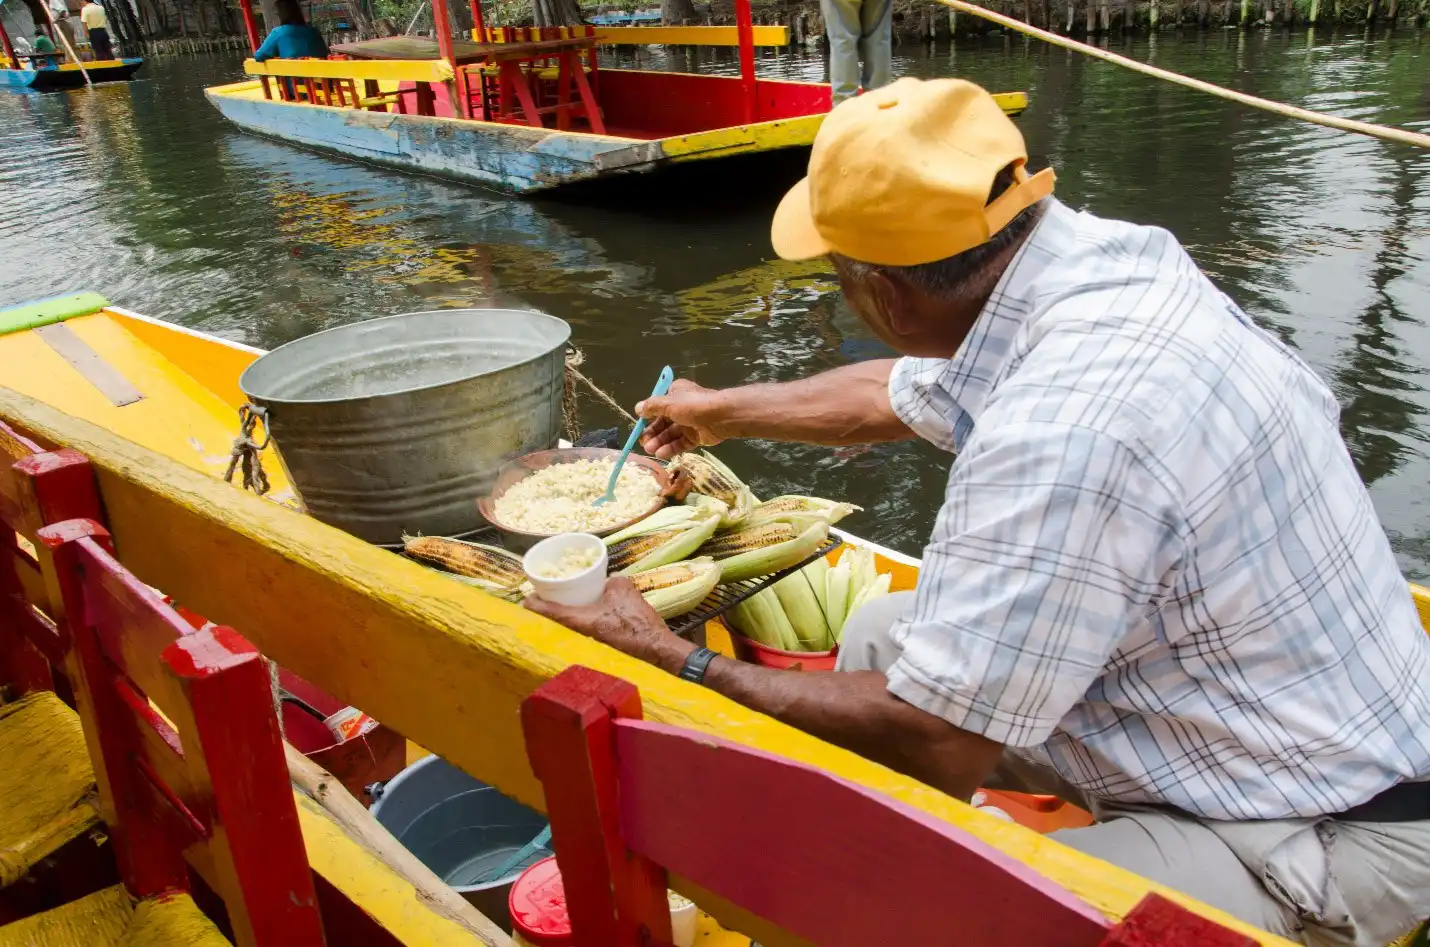 Man dishing out rice in colorful boat on water